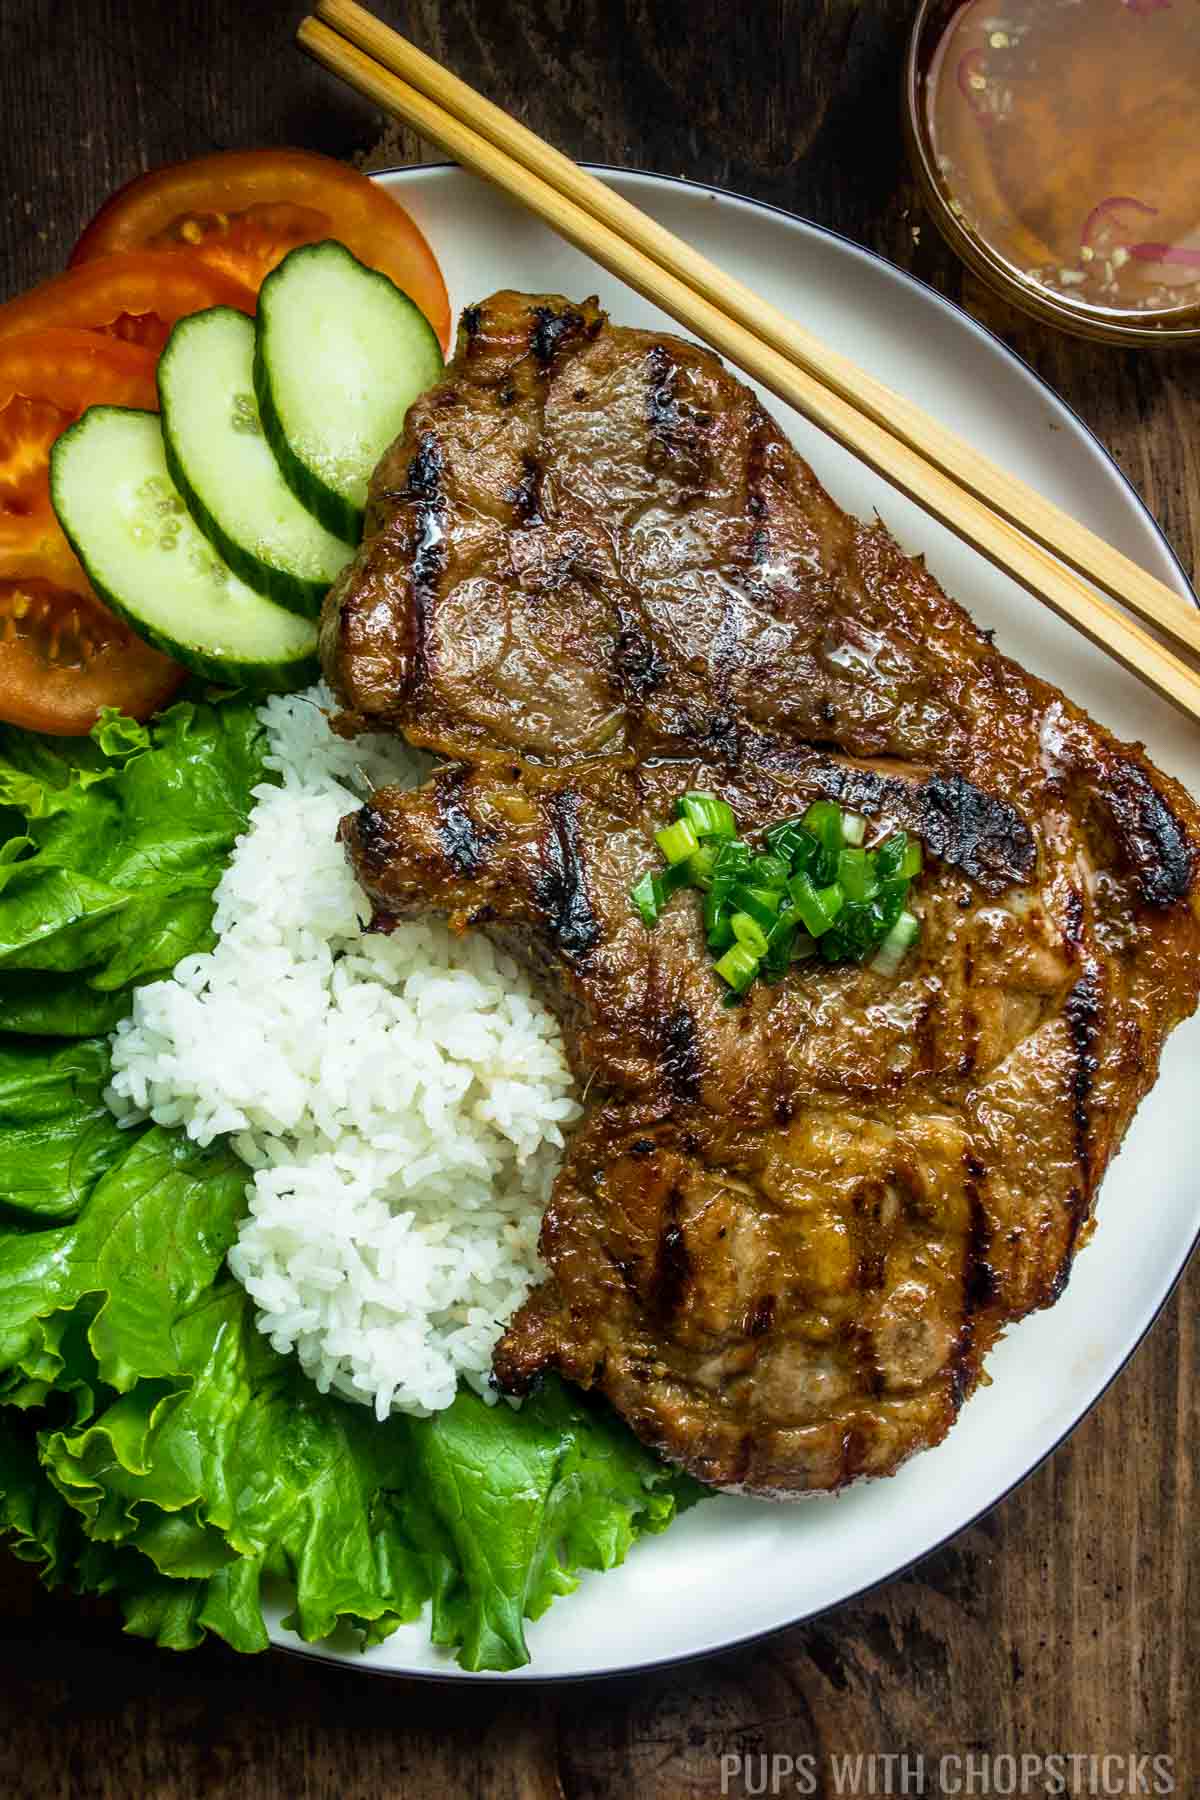 Vietnamese lemongrass pork chops served on a large white plate with rice, tomatoes and cucumber with a side of nuoc cham dipping sauce